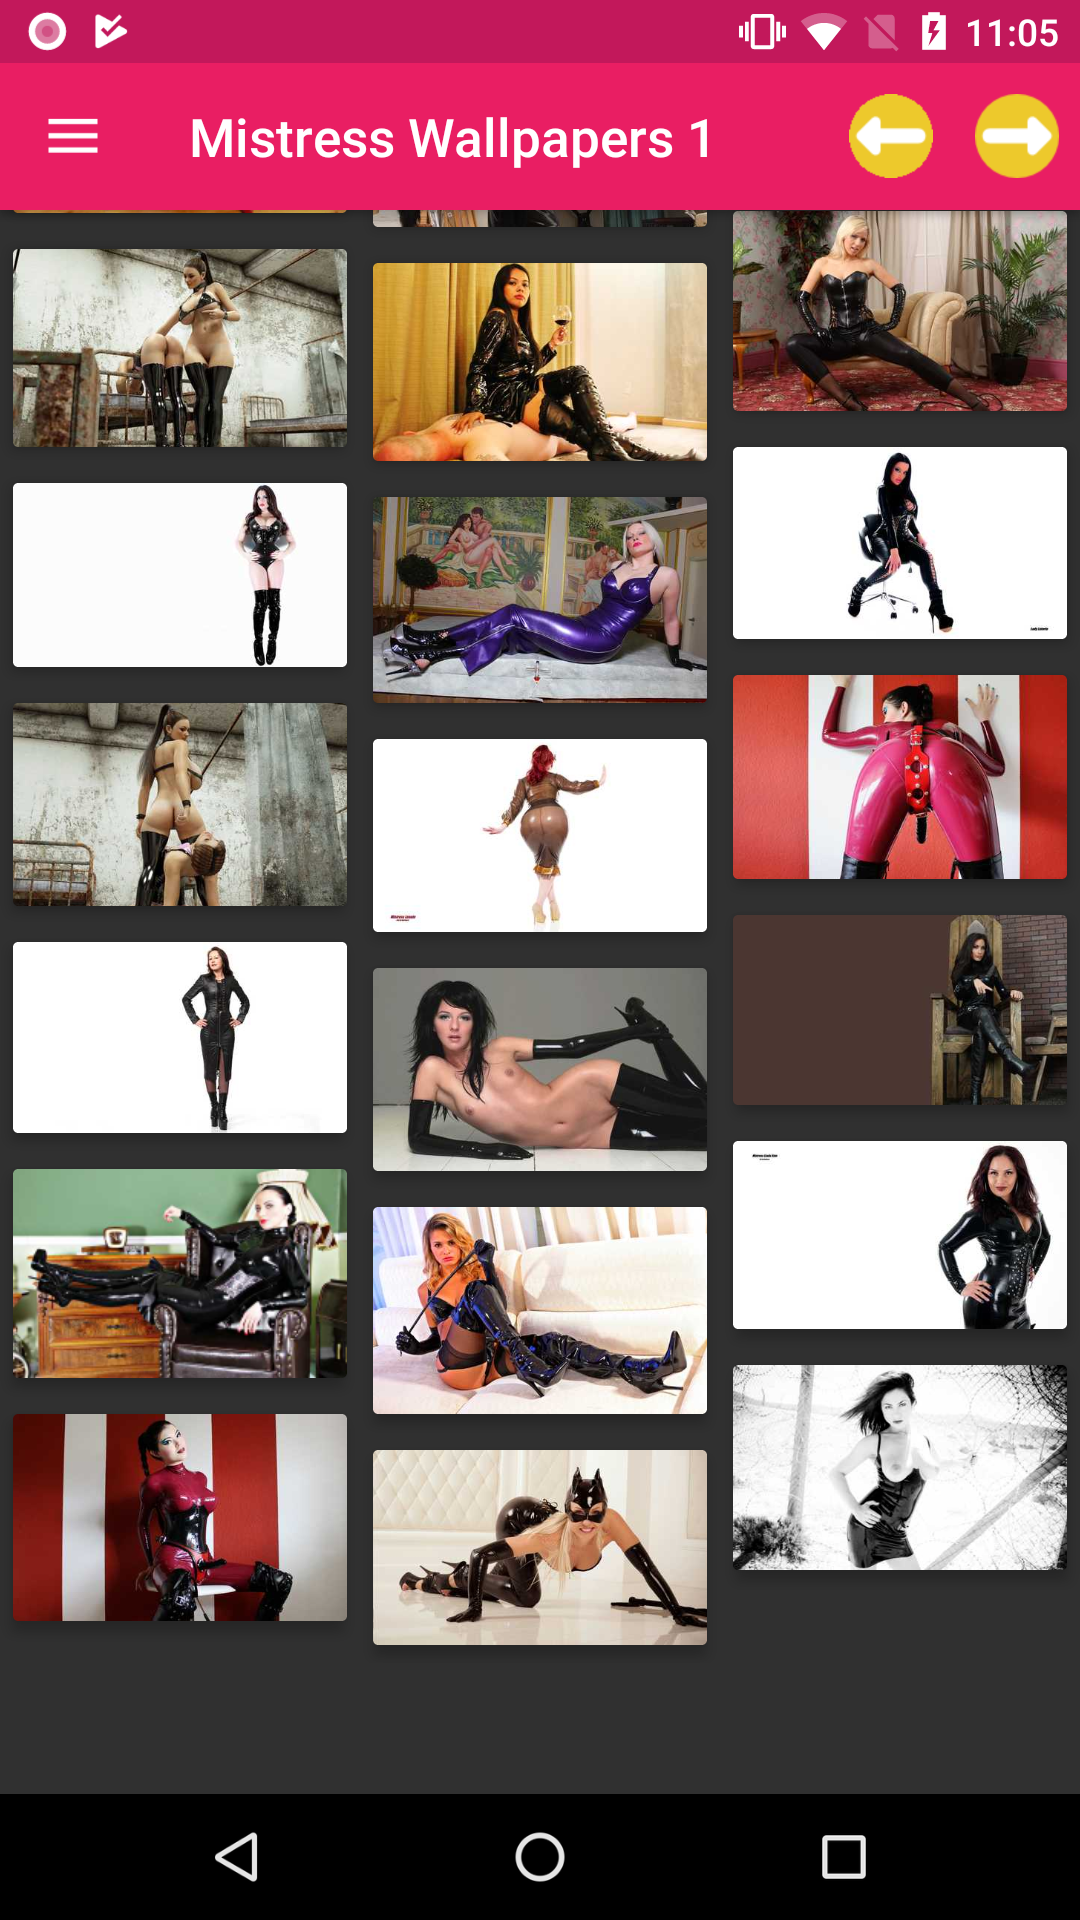 Mistress Wallpapers pictures,android,ebony,hotebonypics,download,domination,app,hetai,femdom,images,apps,страпон,pic,latex,манга,video,hentai,apk,mistress,bdsm,wallpapers,futanari,porn